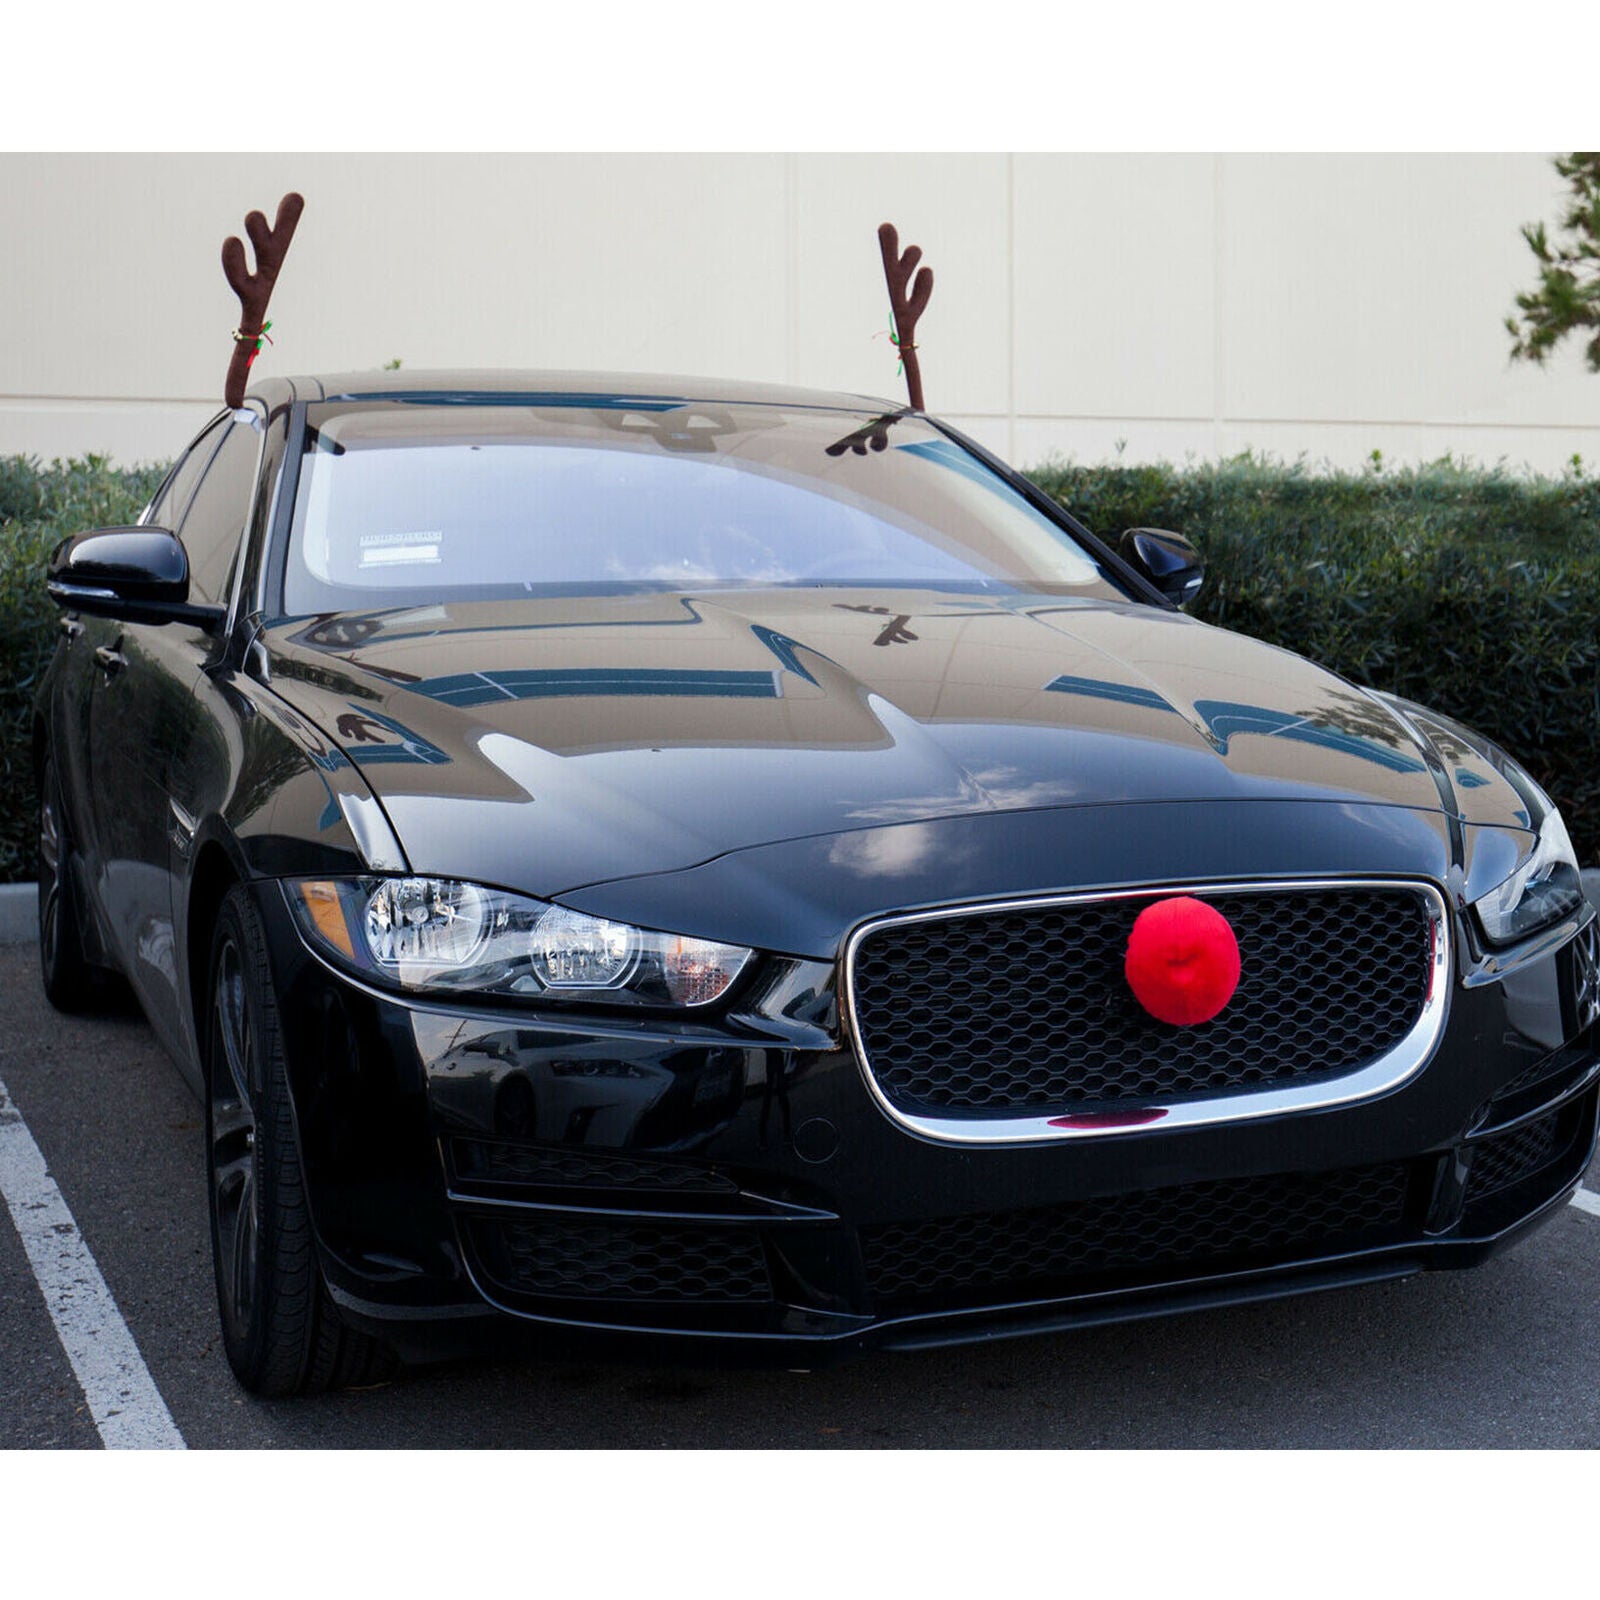 Reindeer Christmas Decoration For Car, Holiday Party Antlers And Nose Decor